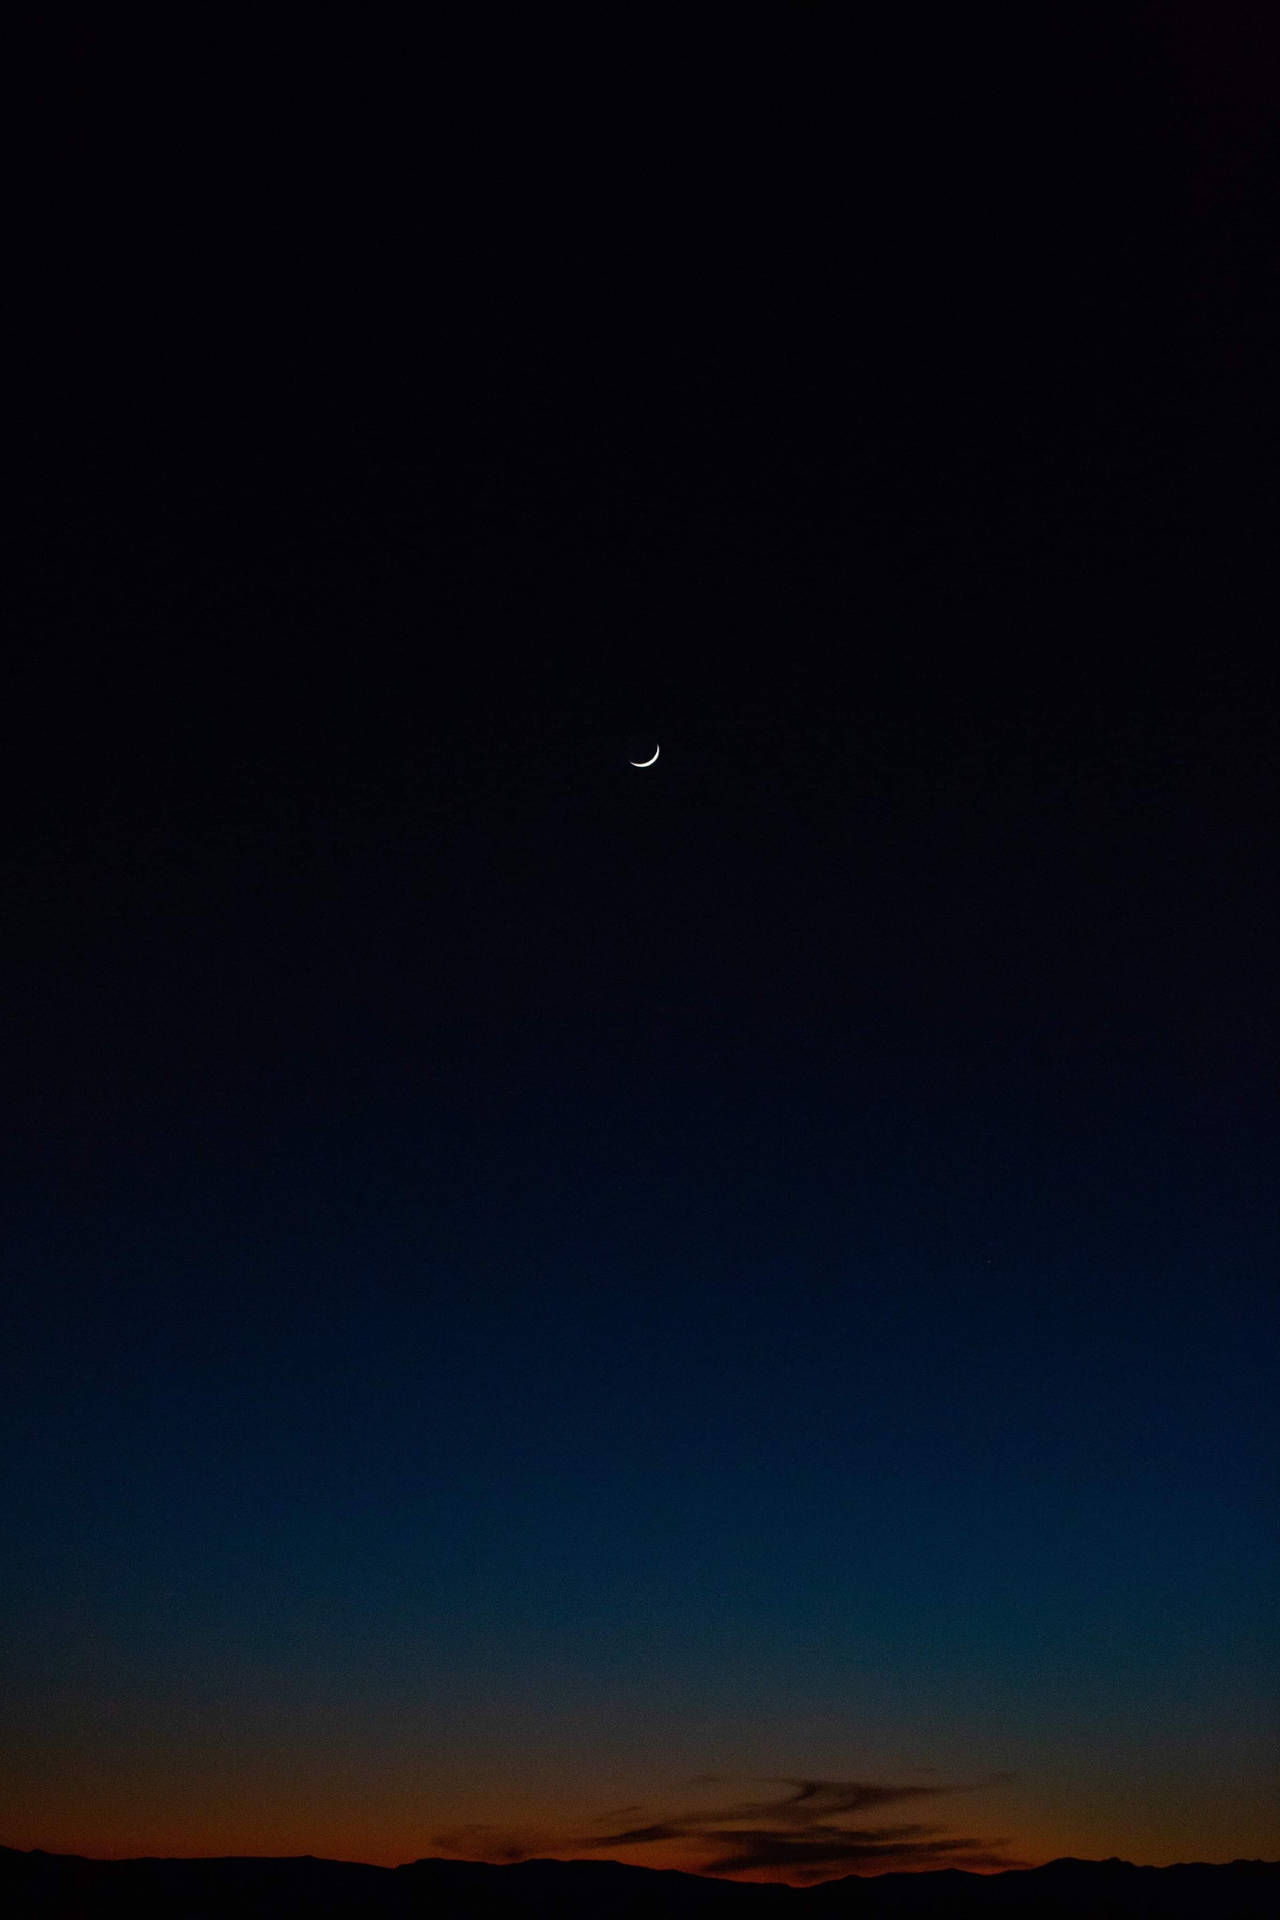 A Crescent Is Seen In The Sky Over A Desert